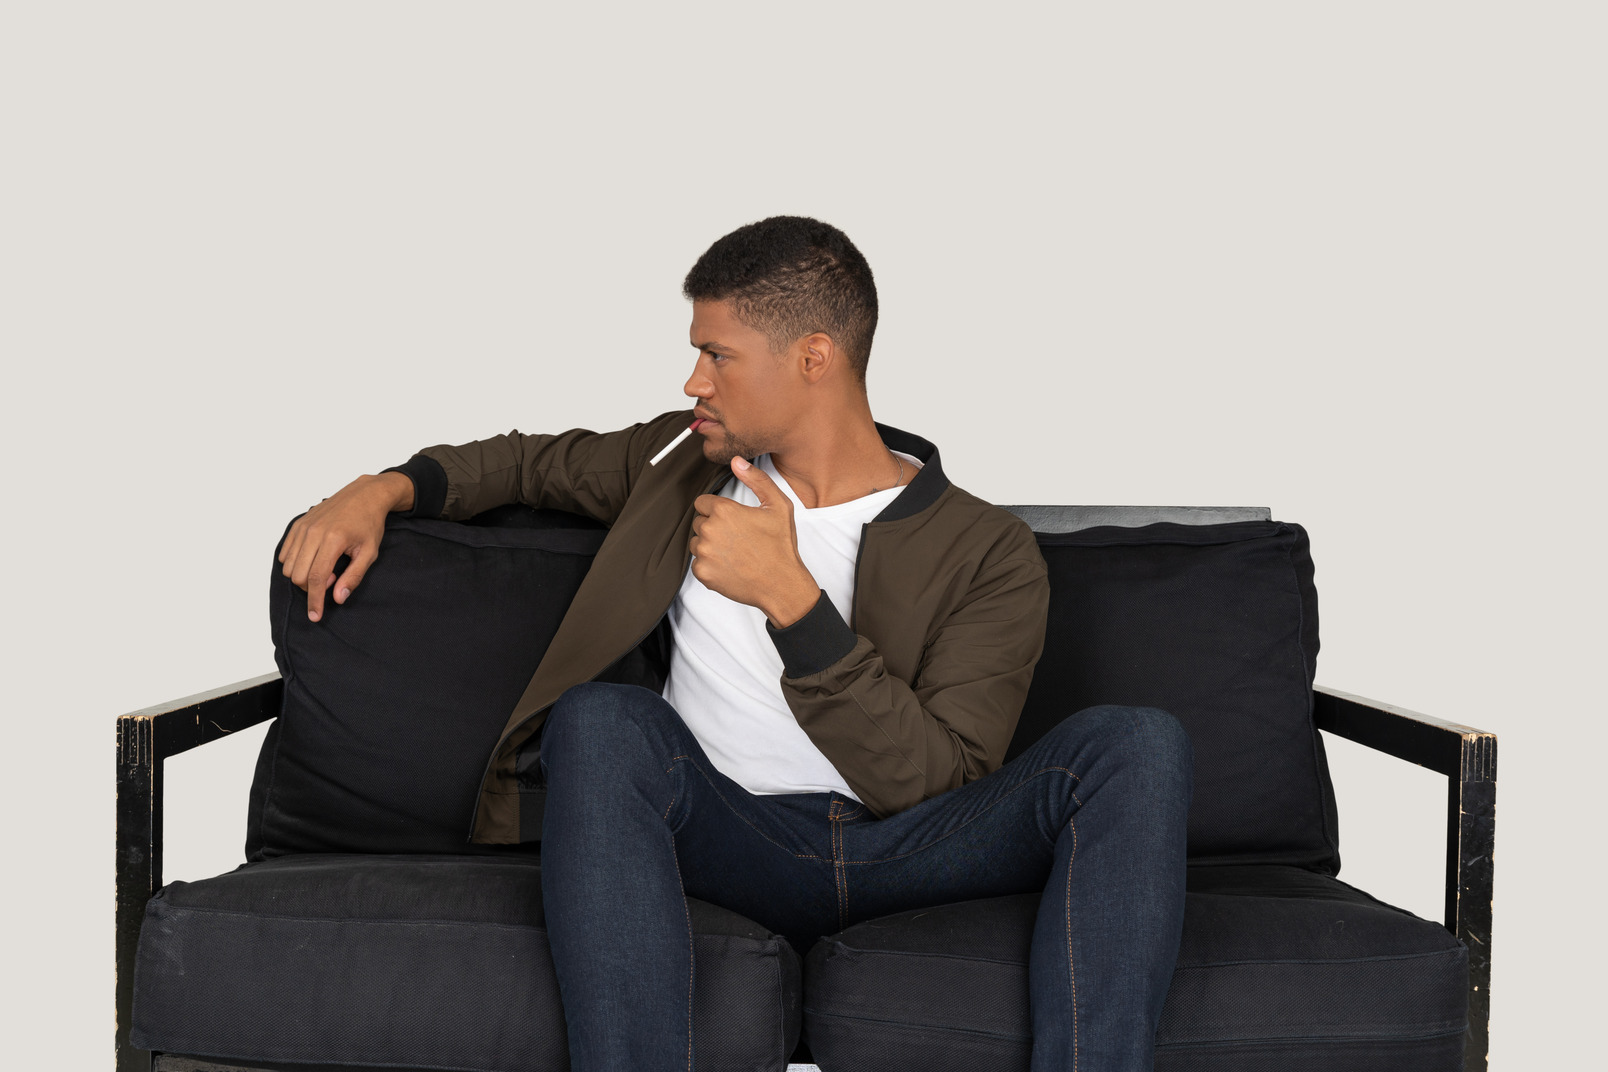 Front view of a young arrogant man sitting on a sofa and holding cigarette in mouth